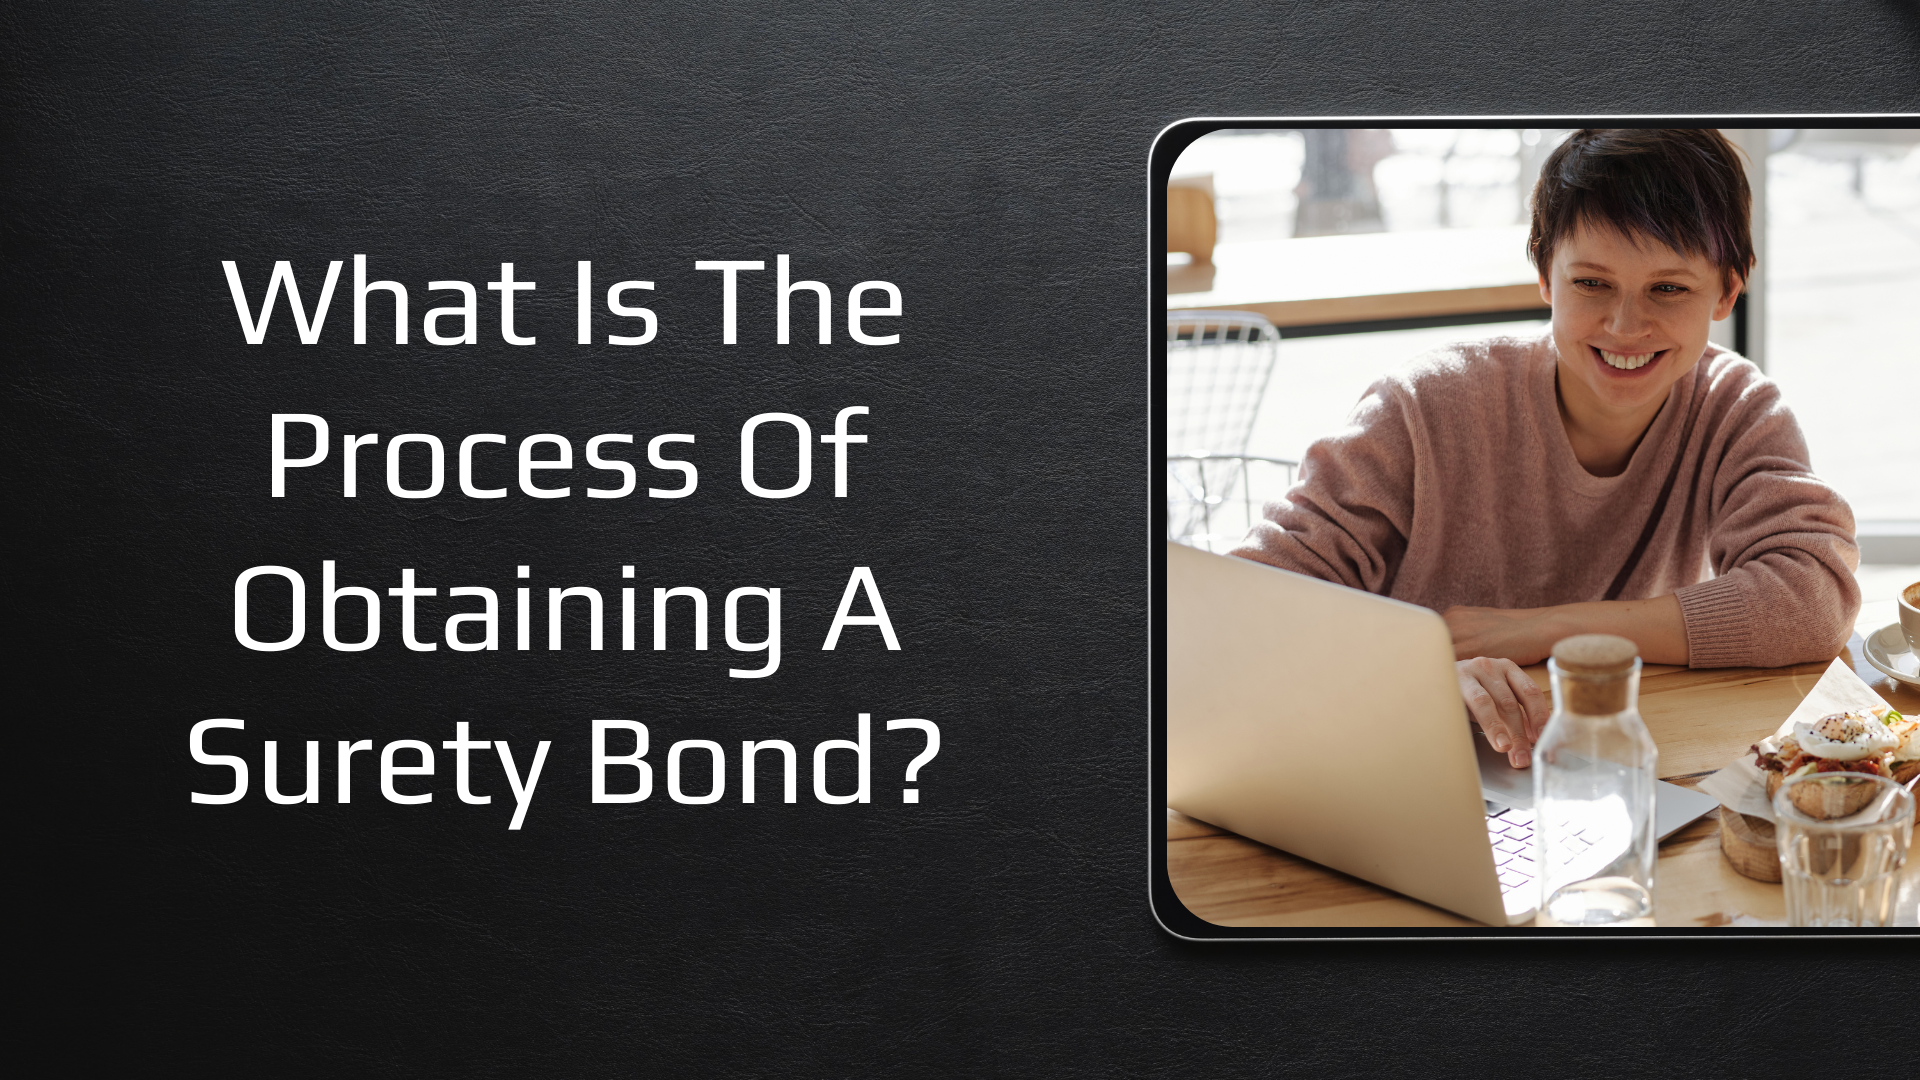 surety bond - What are the steps involved in the process of obtaining a surety bond - working